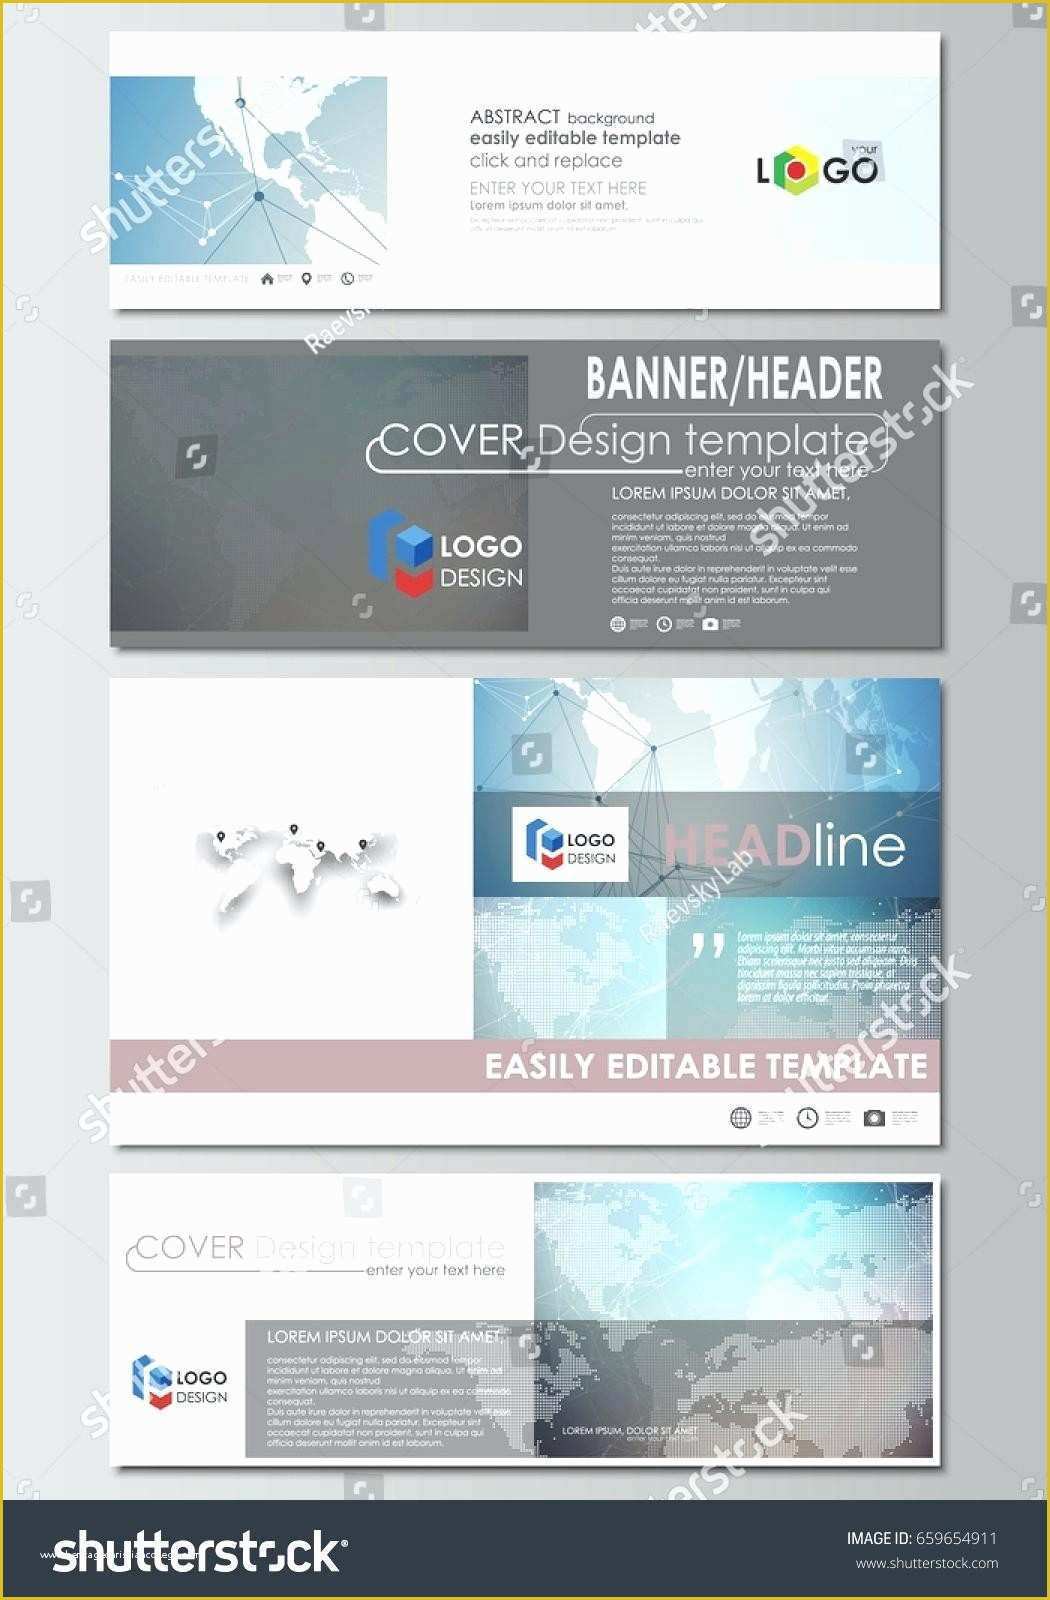 Free Email Banner Templates Of New Download Free Email Signature Templates for Outlook